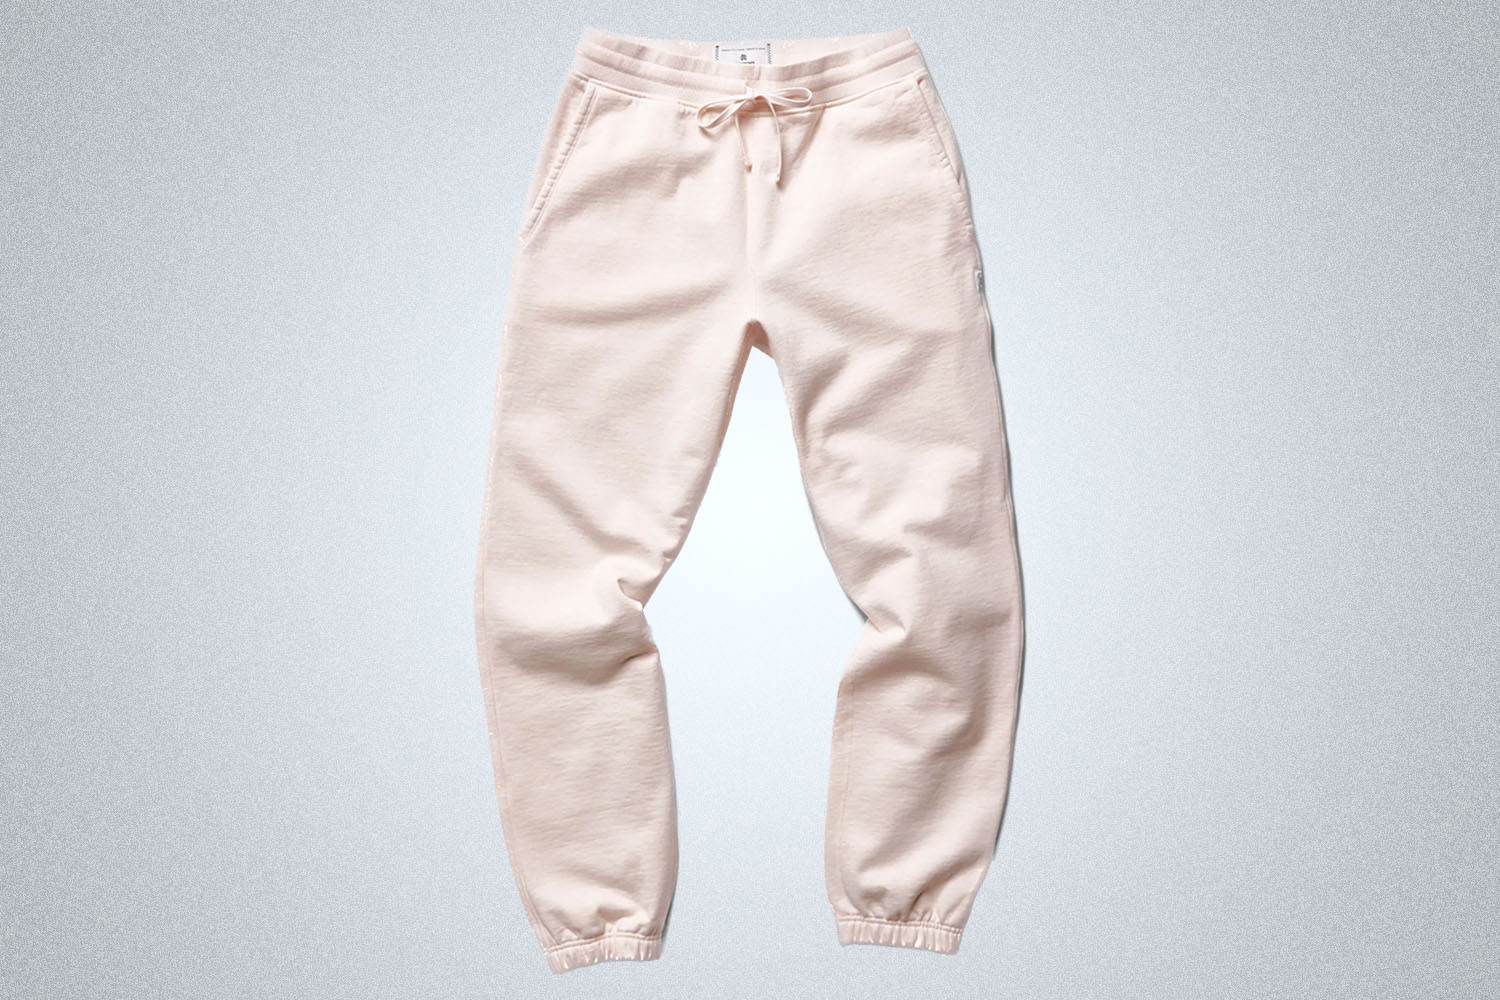 Buy Comfortable Mens Lounge Pants and Pajamas in India